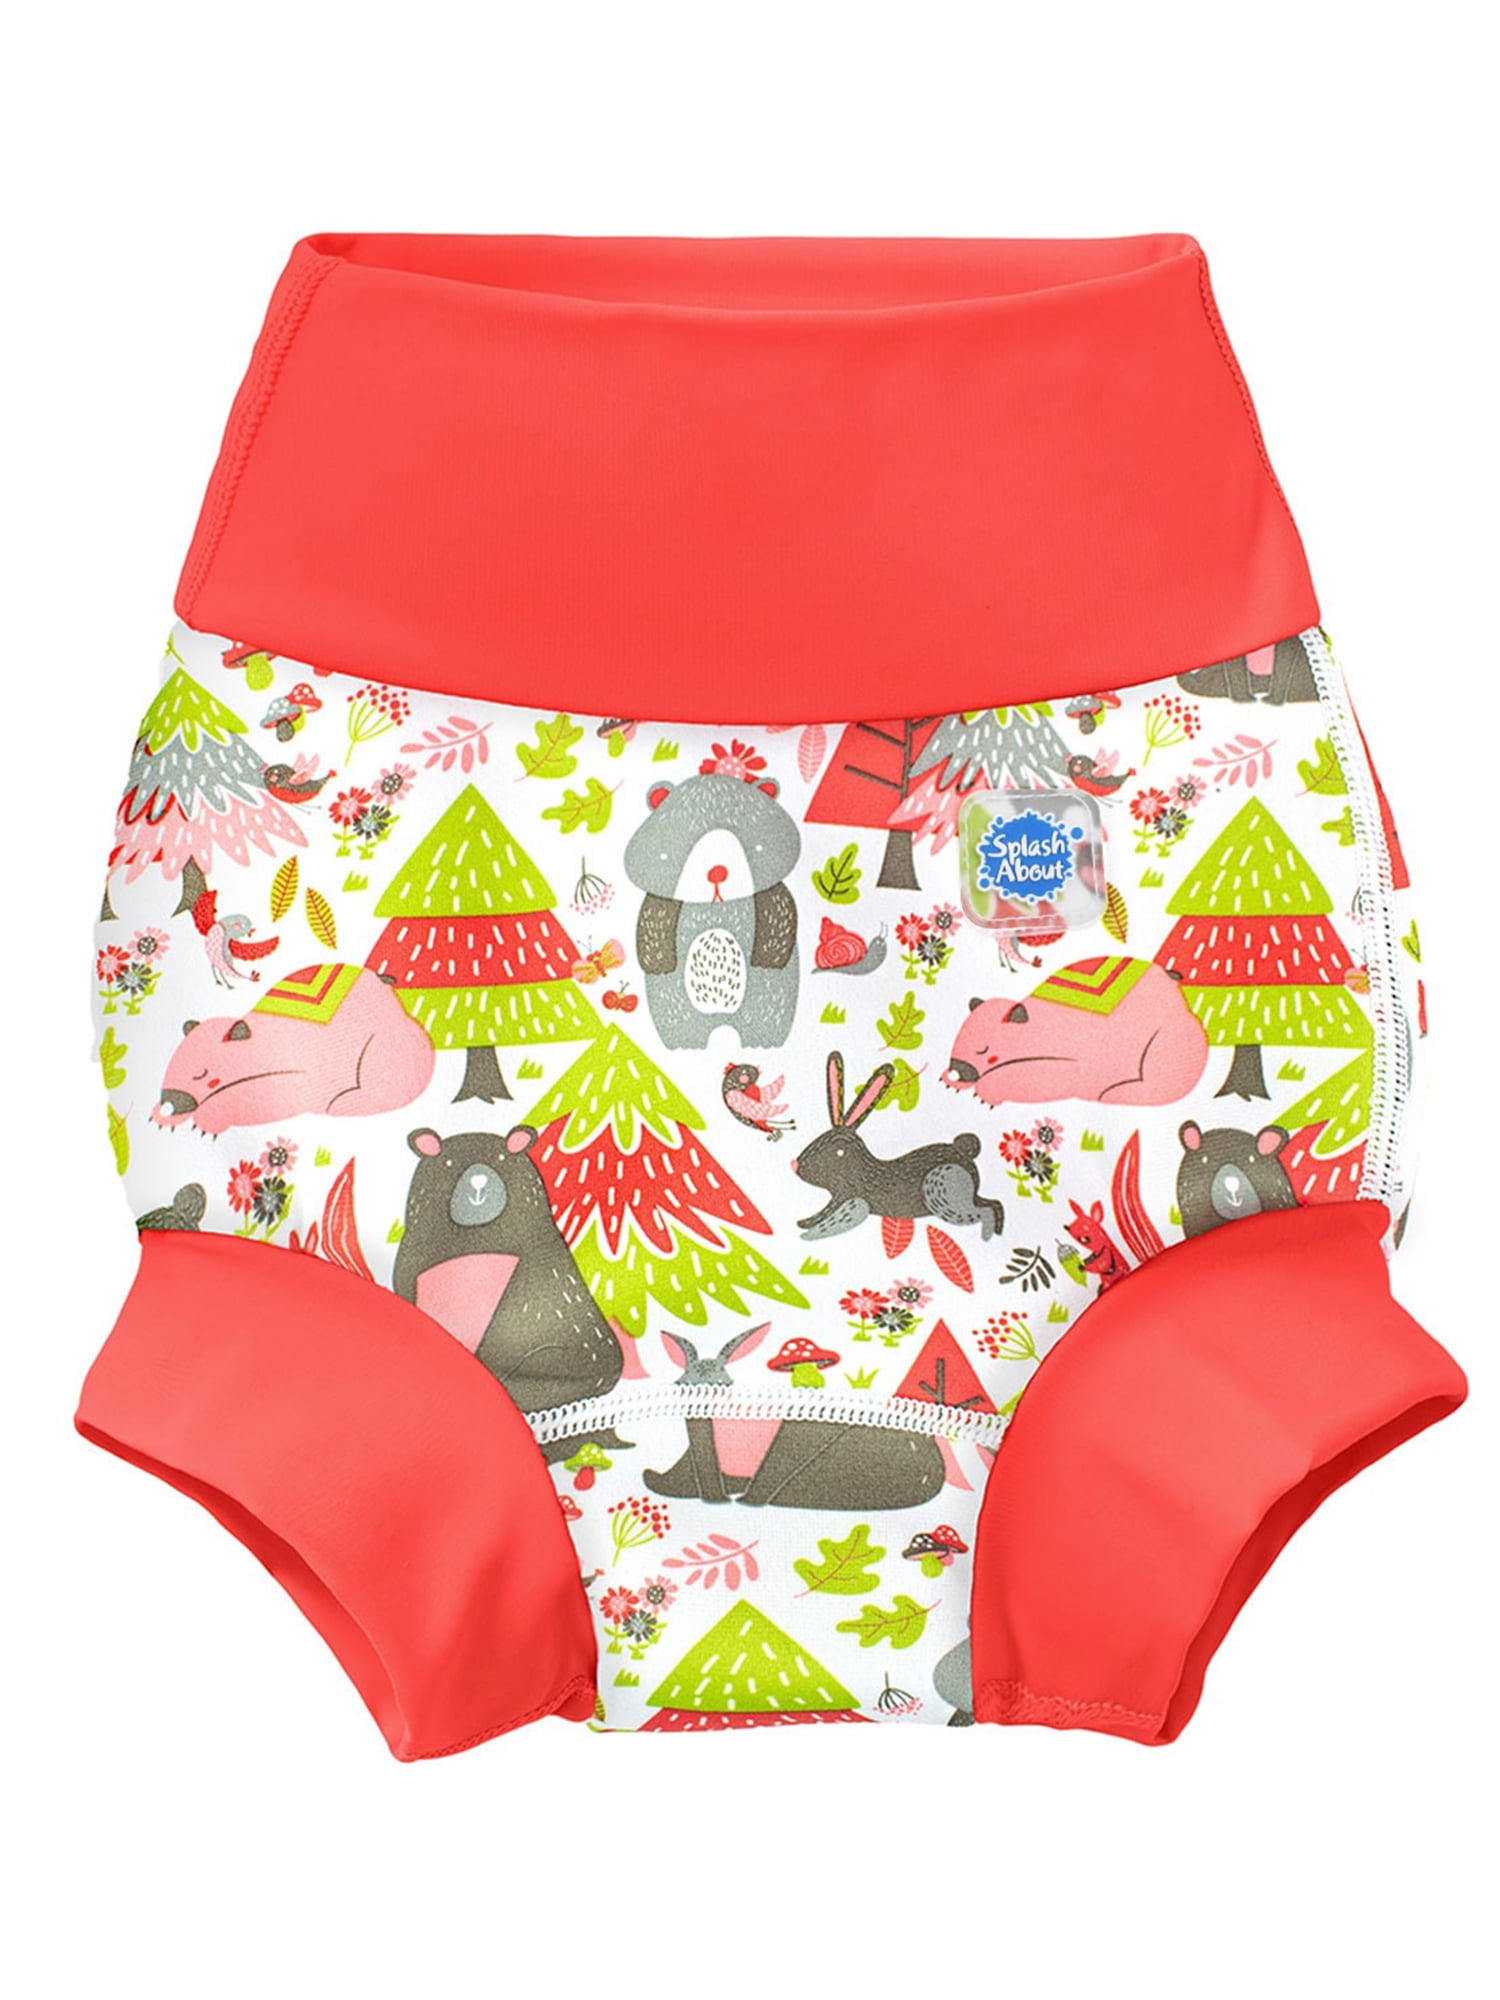 Splash About New and Improved Happy Nappy Swim Diapers Into The Woods, 6-12 Months